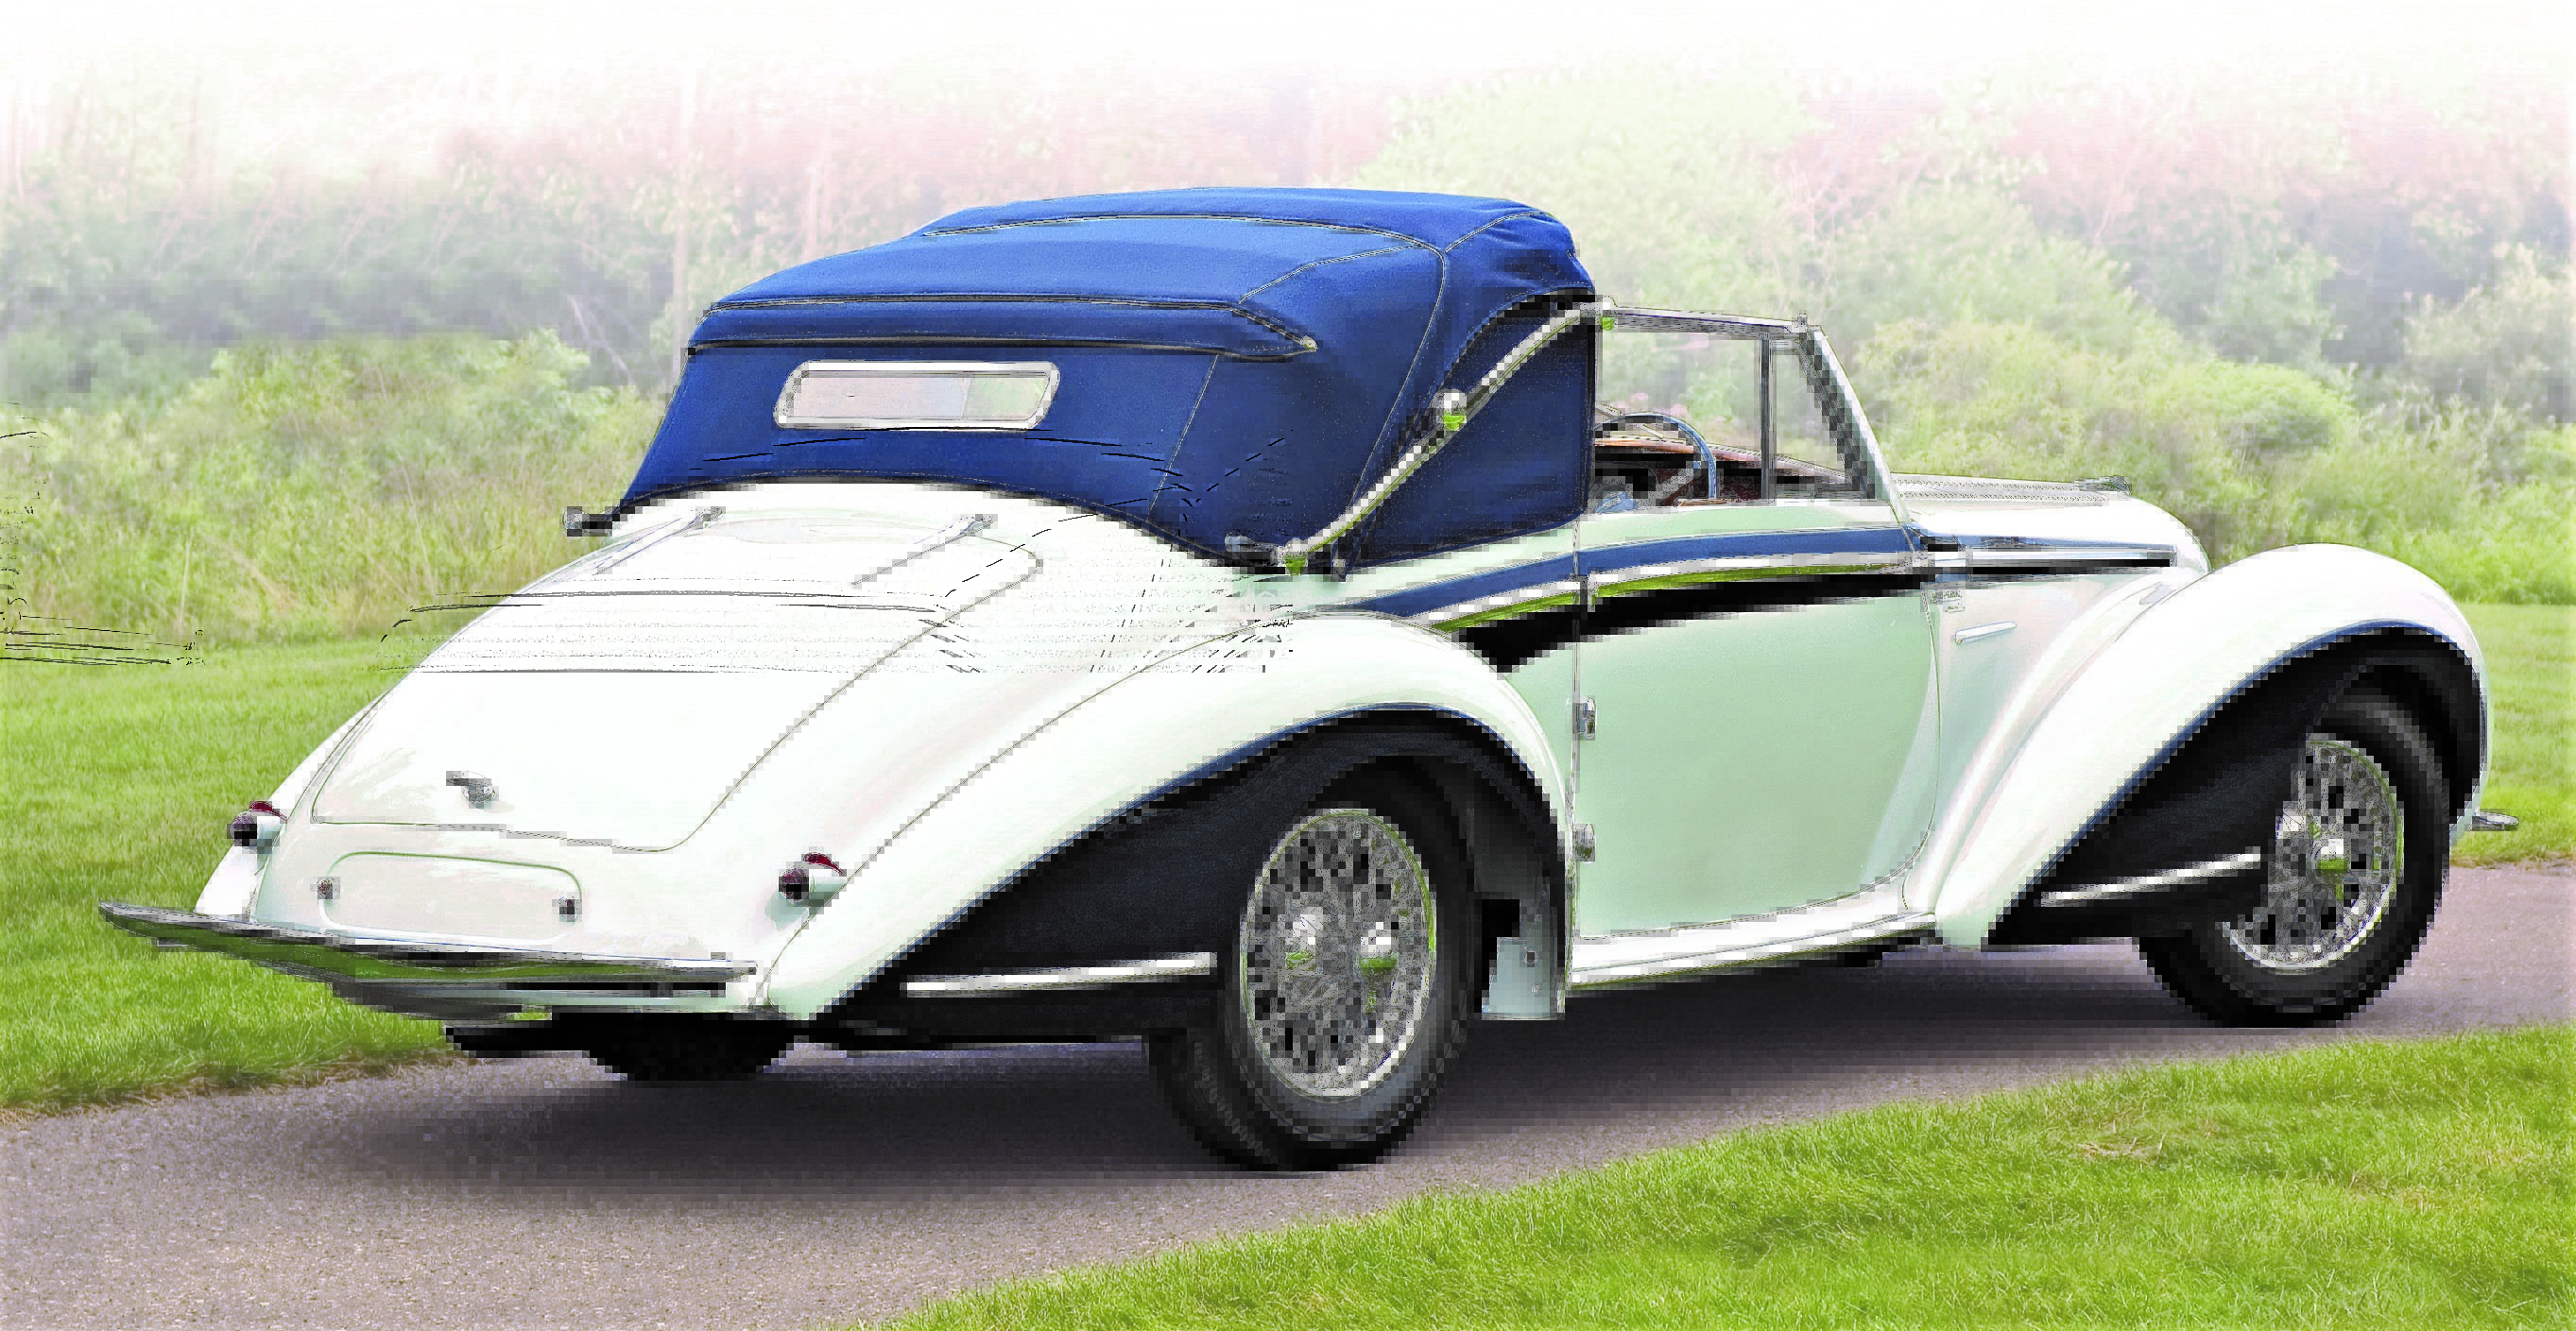 , Classic coachbuilt ’48 Delahaye on docket for Russo and Steele’s Scottsdale auction, ClassicCars.com Journal